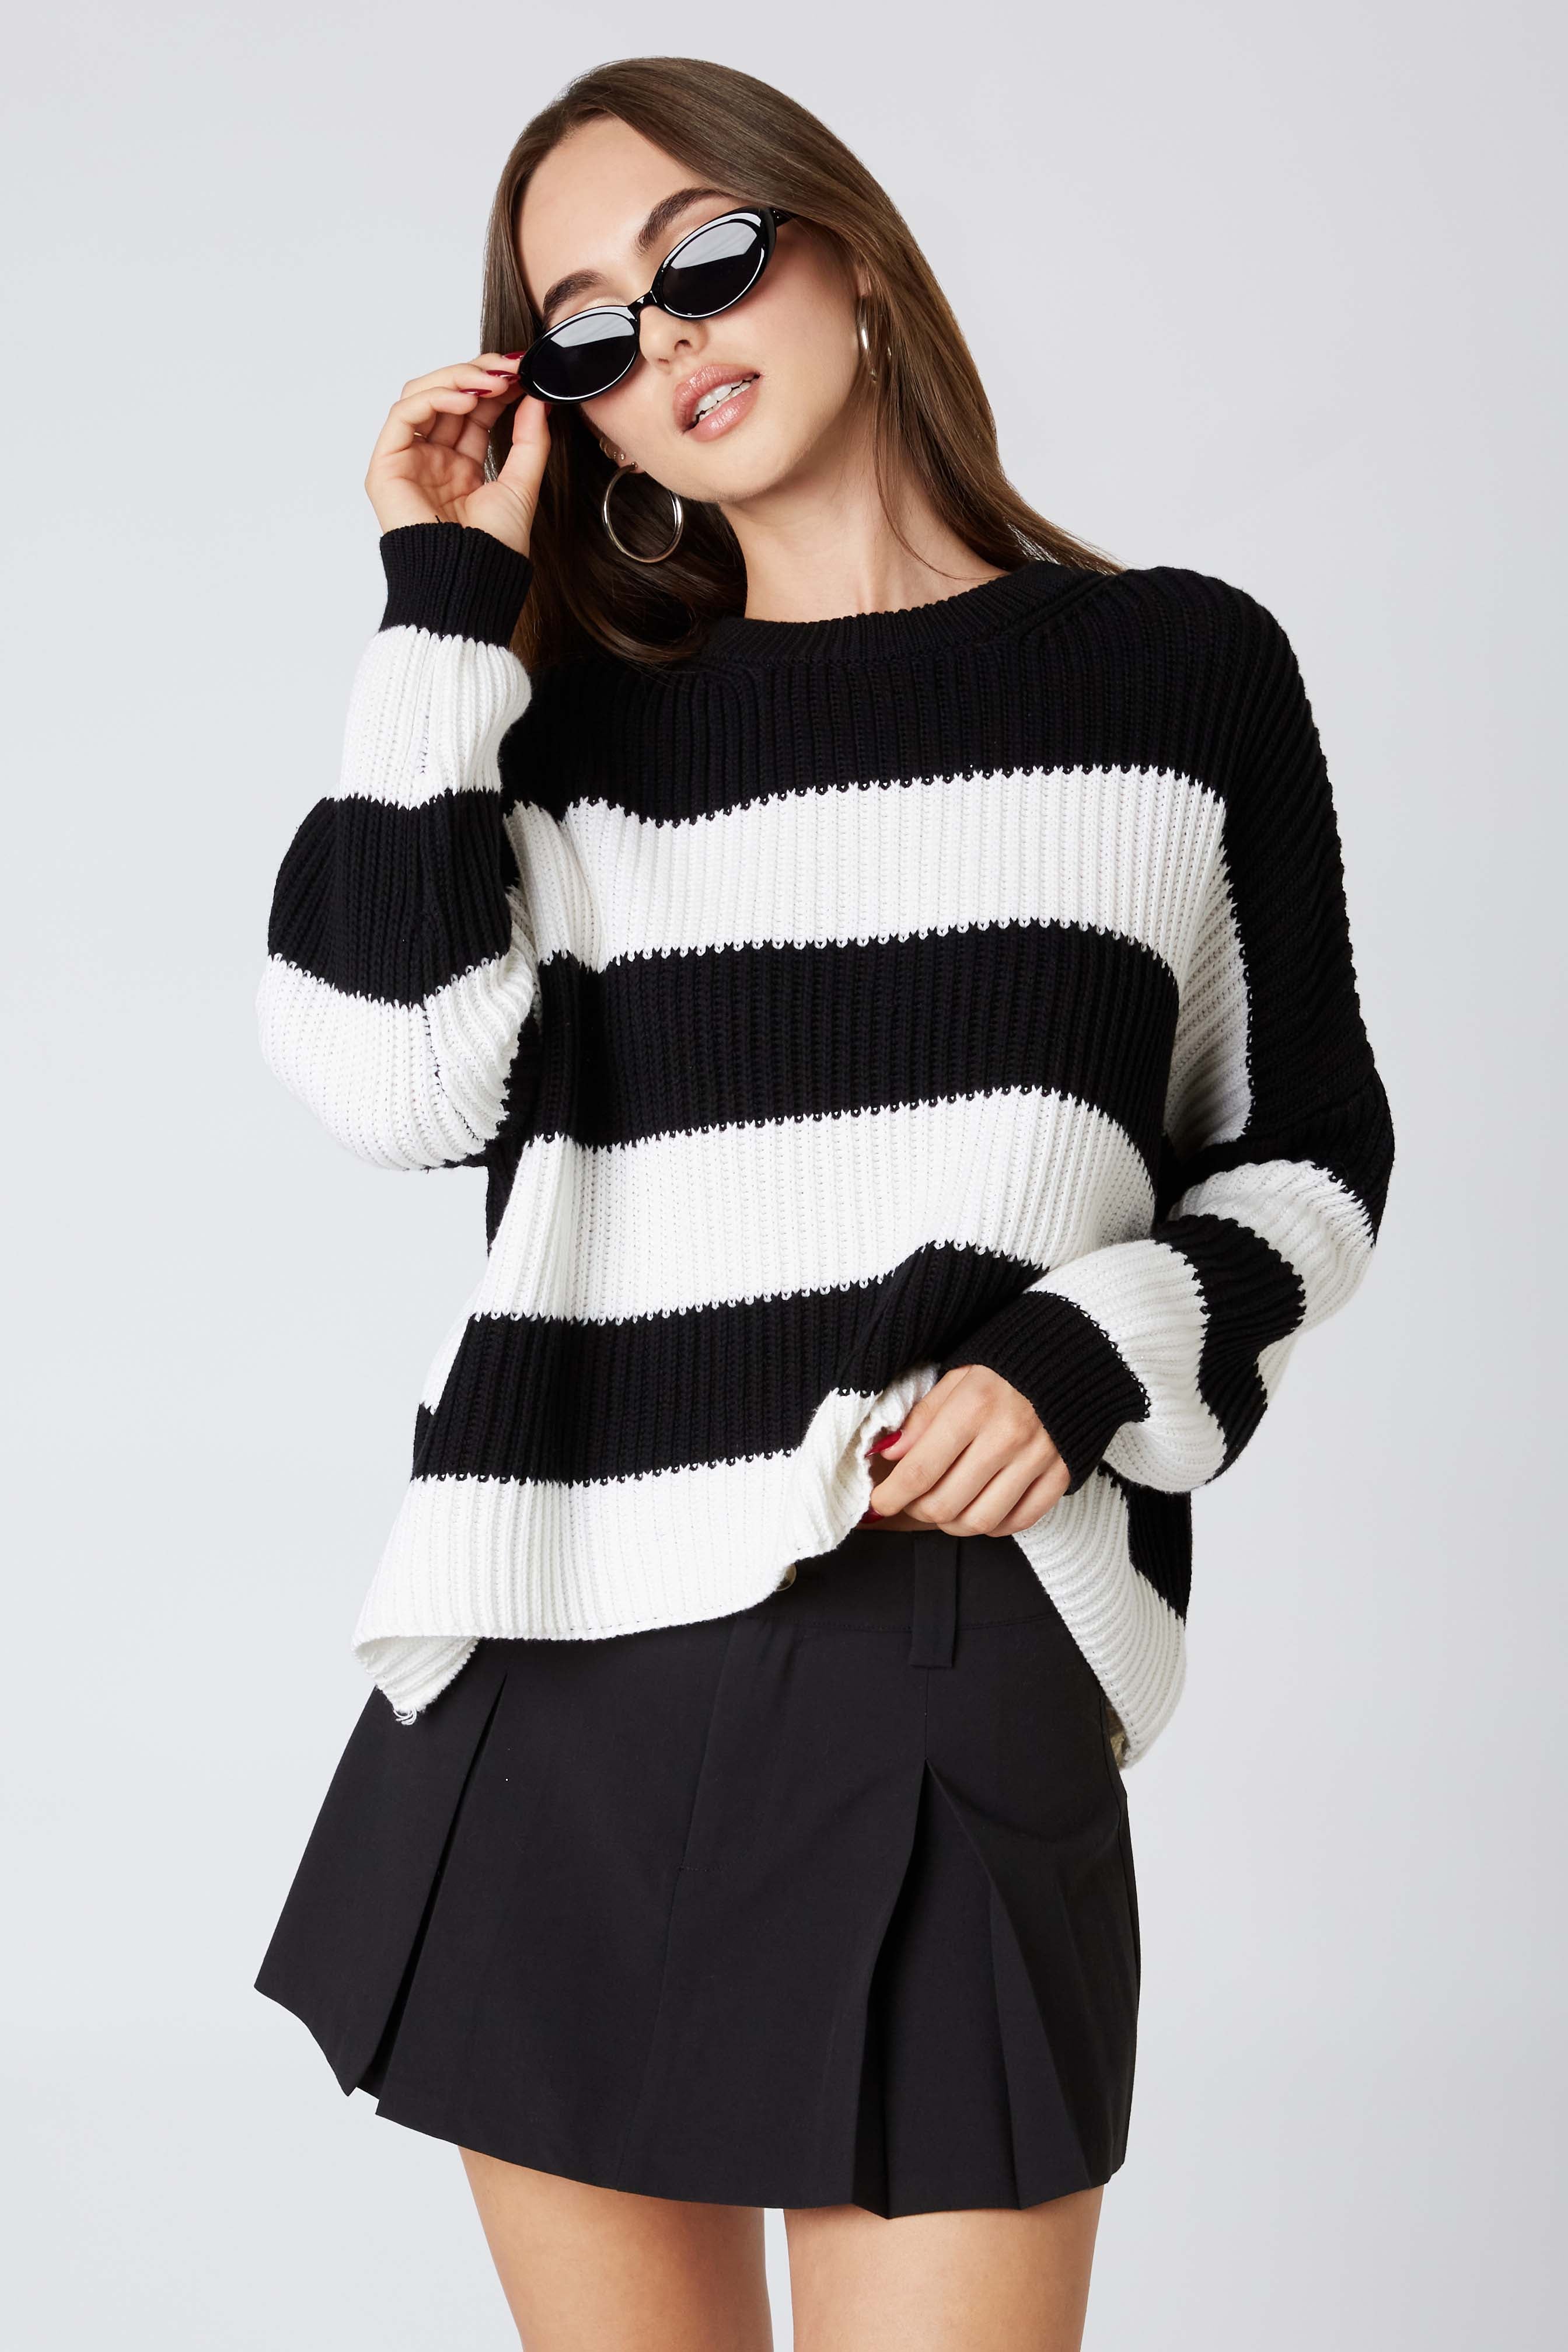 Rugby Oversized Sweater in Black White Front View